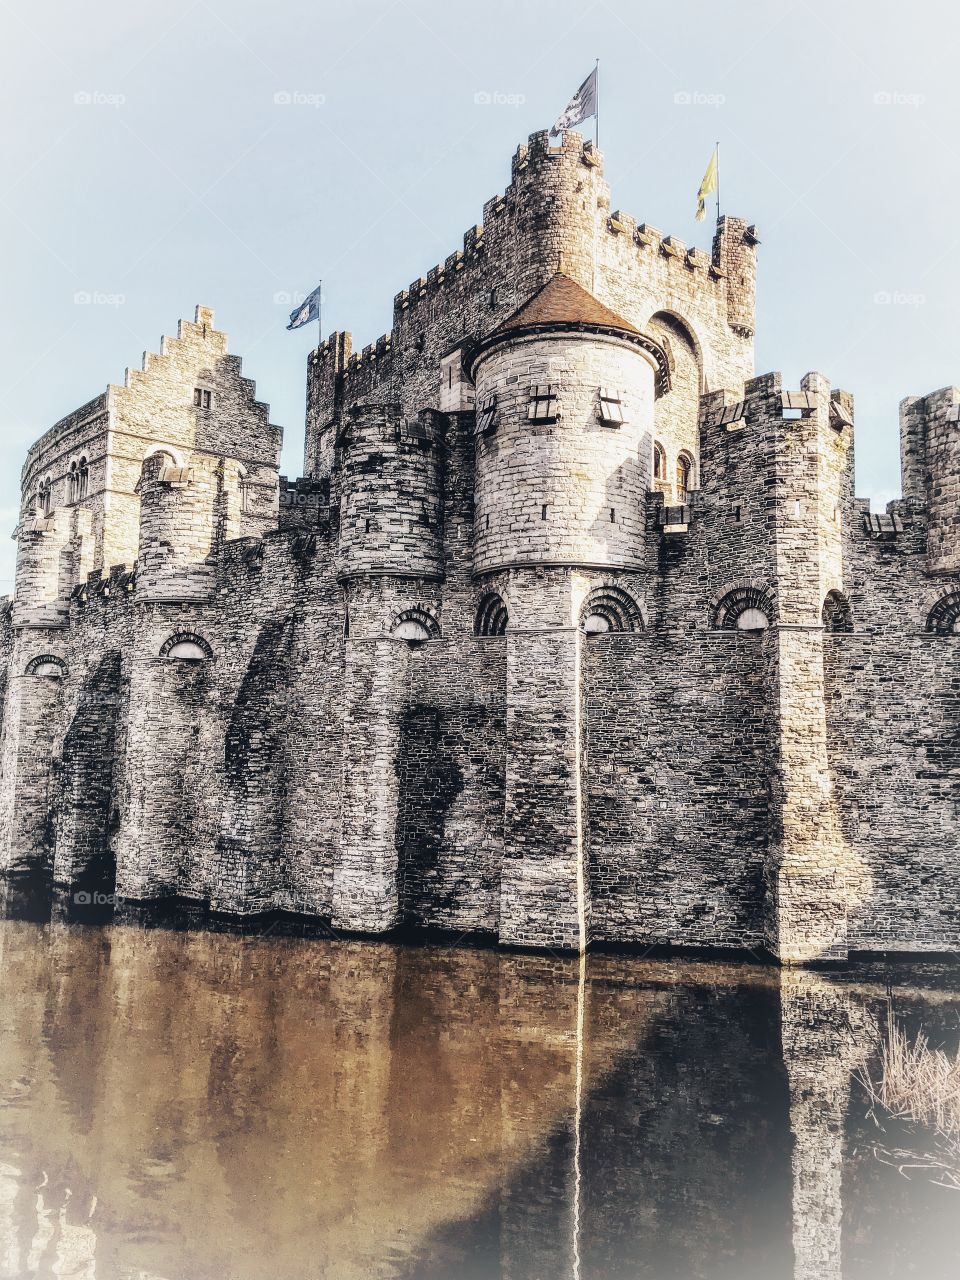 12th century fortress Gravensteen / Castle of the Counts - Ghent, Belgium